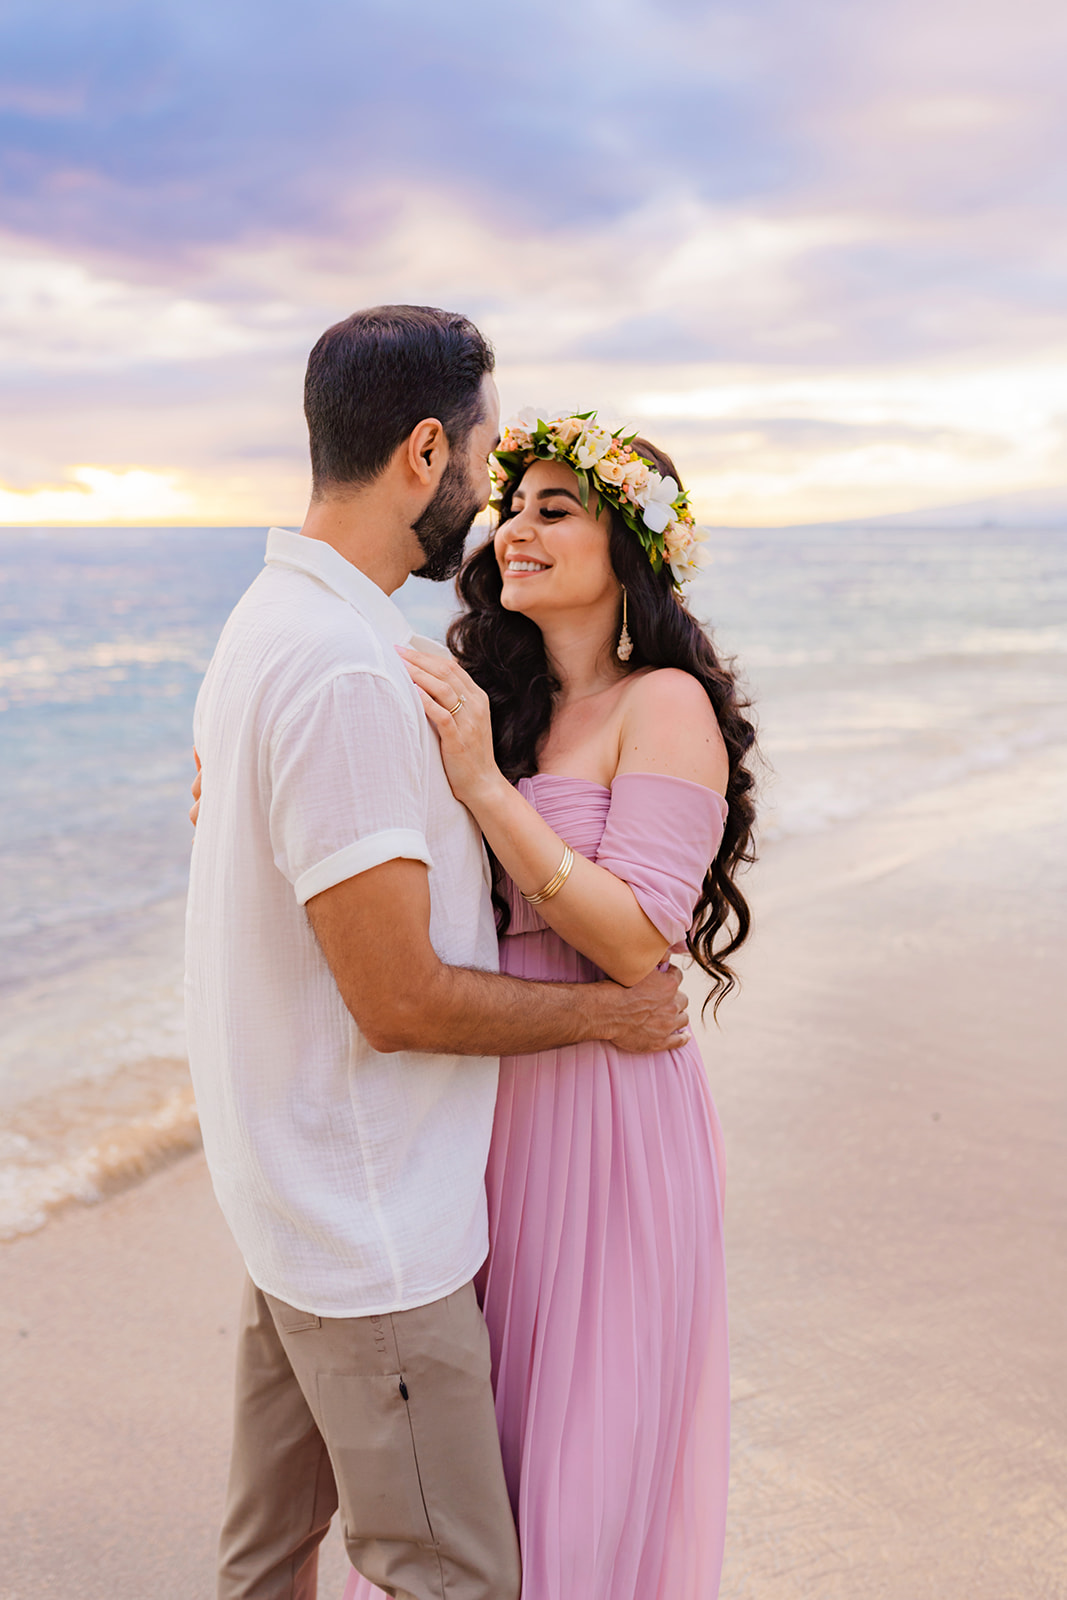 mom-to-be in a flower crown and pink dress flashes a smile at her partner at sunset on a West Maui beach